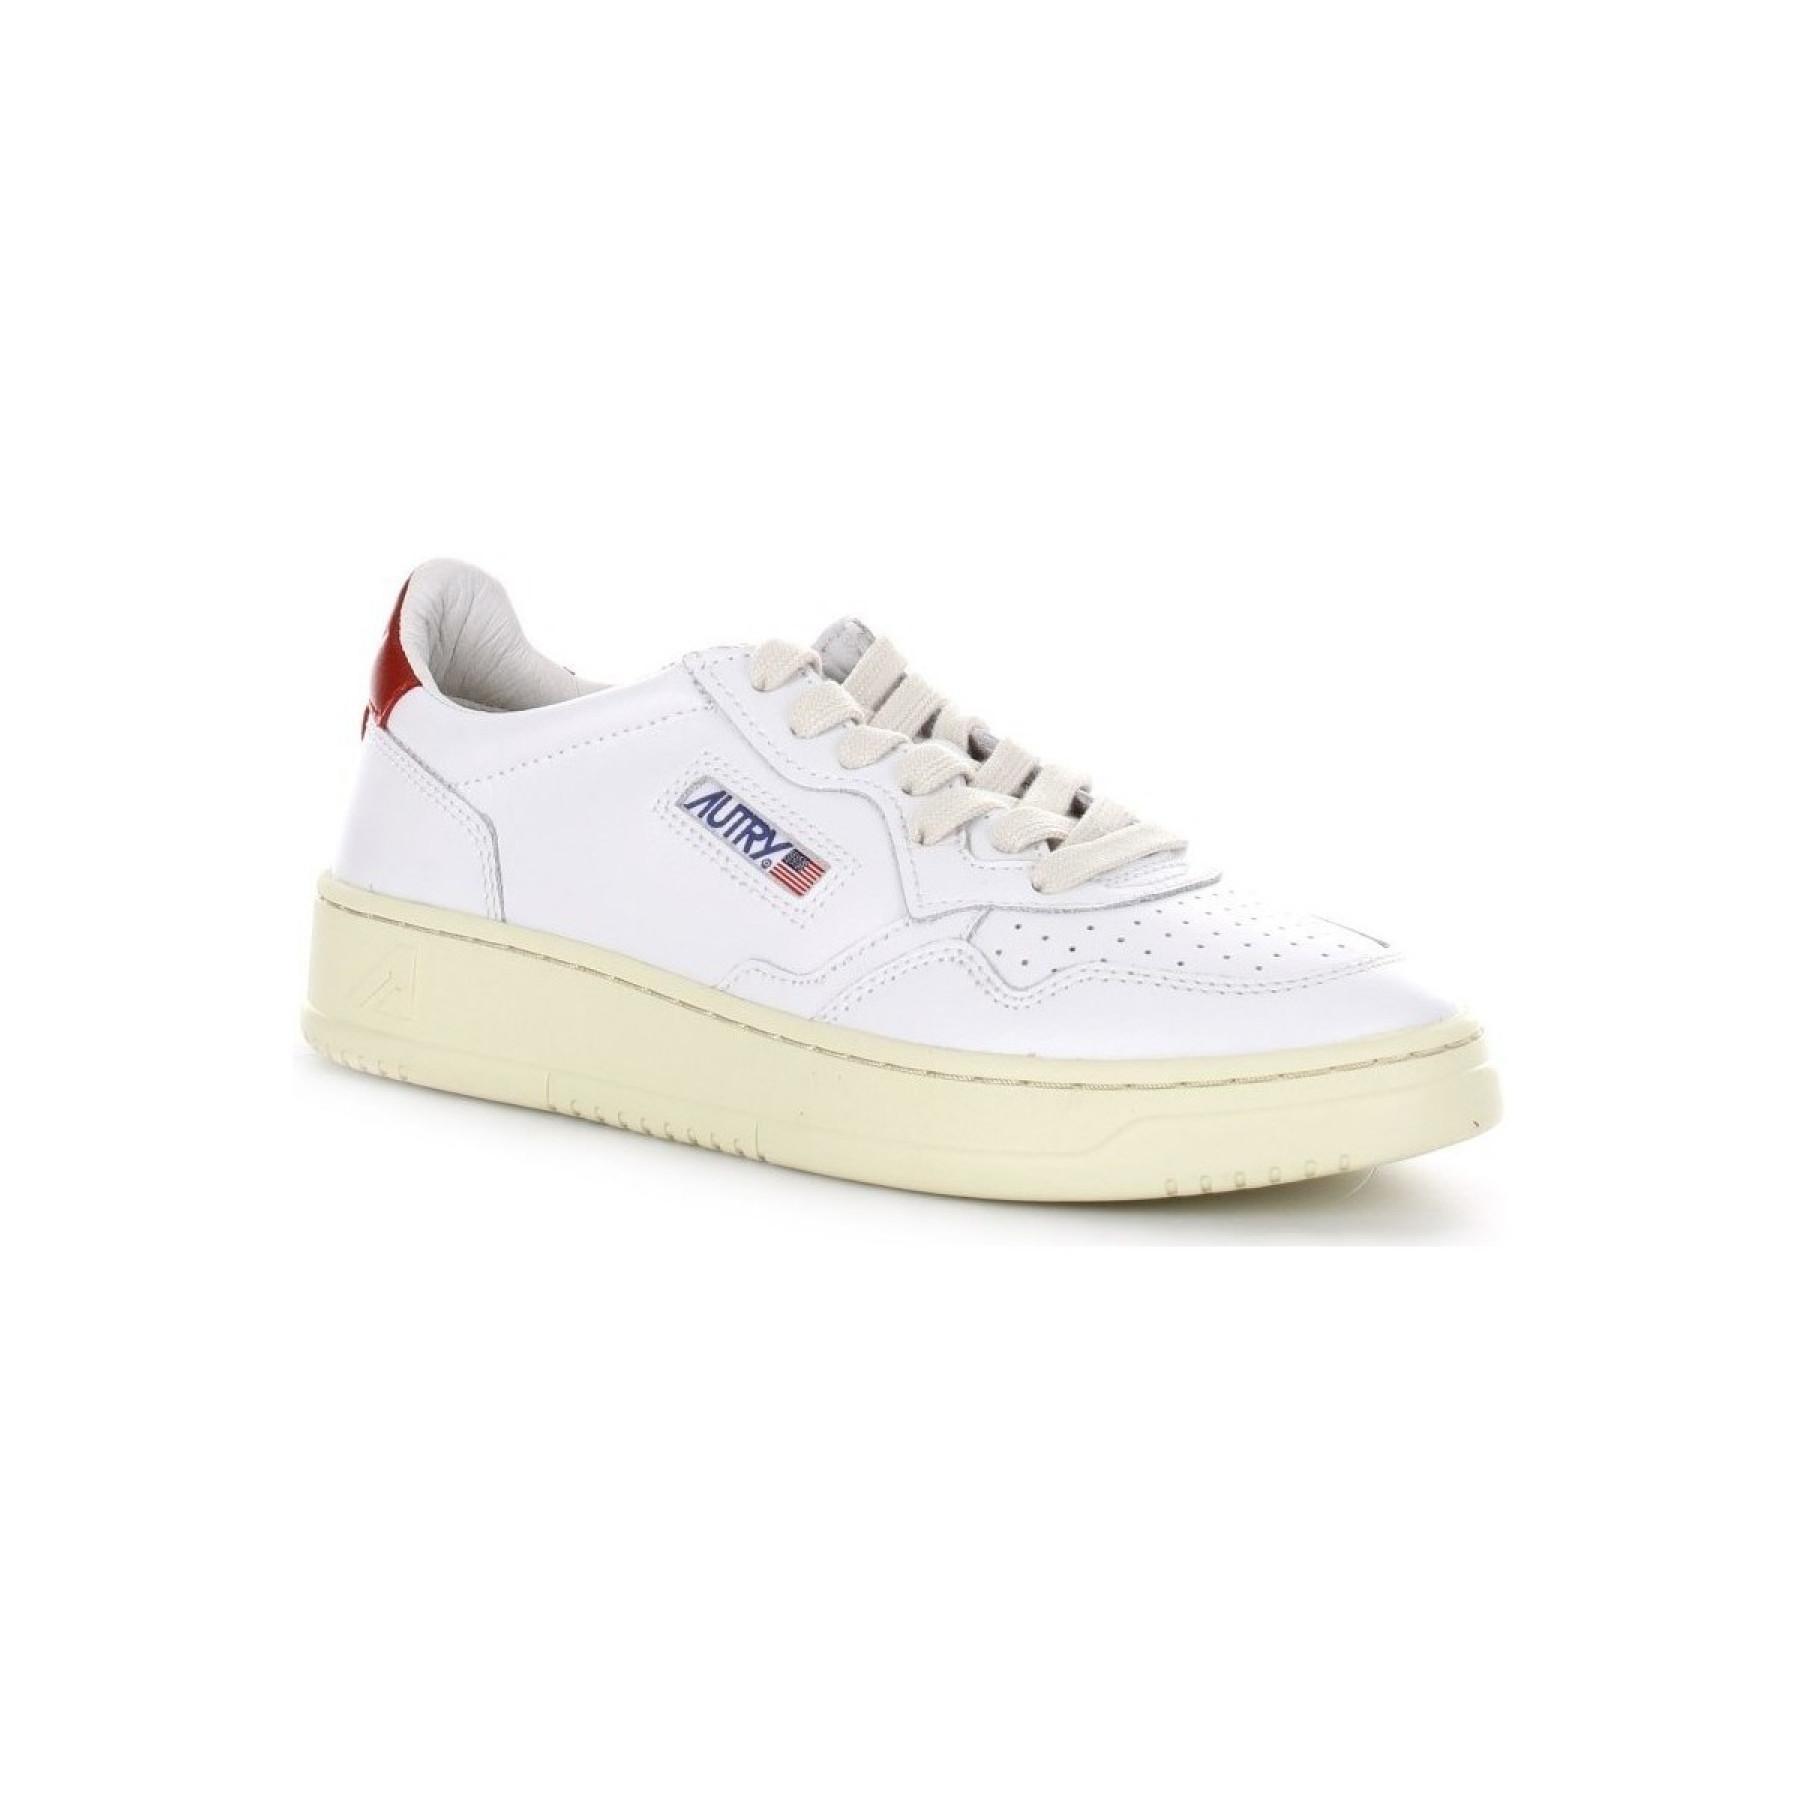 Scarpe Autry Medalist LL21 Leather Bianco/Rosso